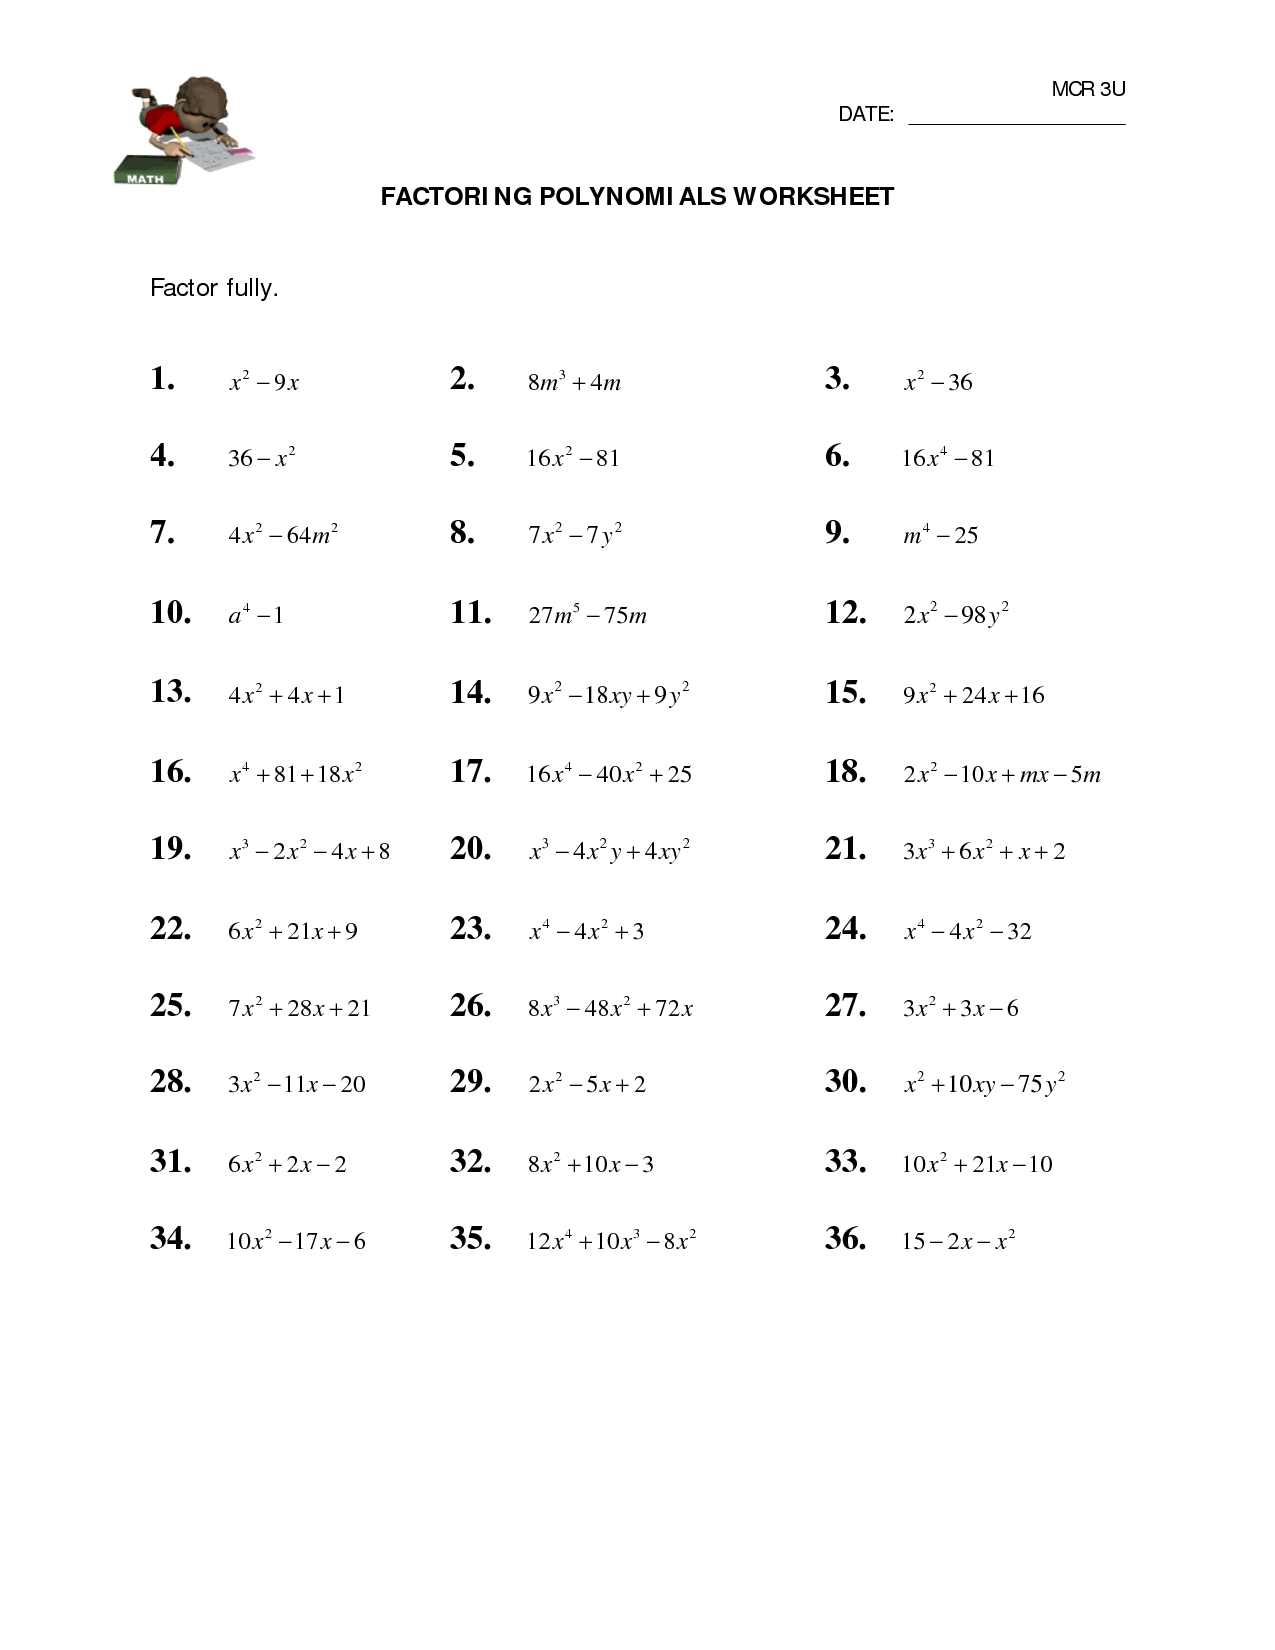 worksheets-about-multiplication-of-polynomials-printablemultiplication